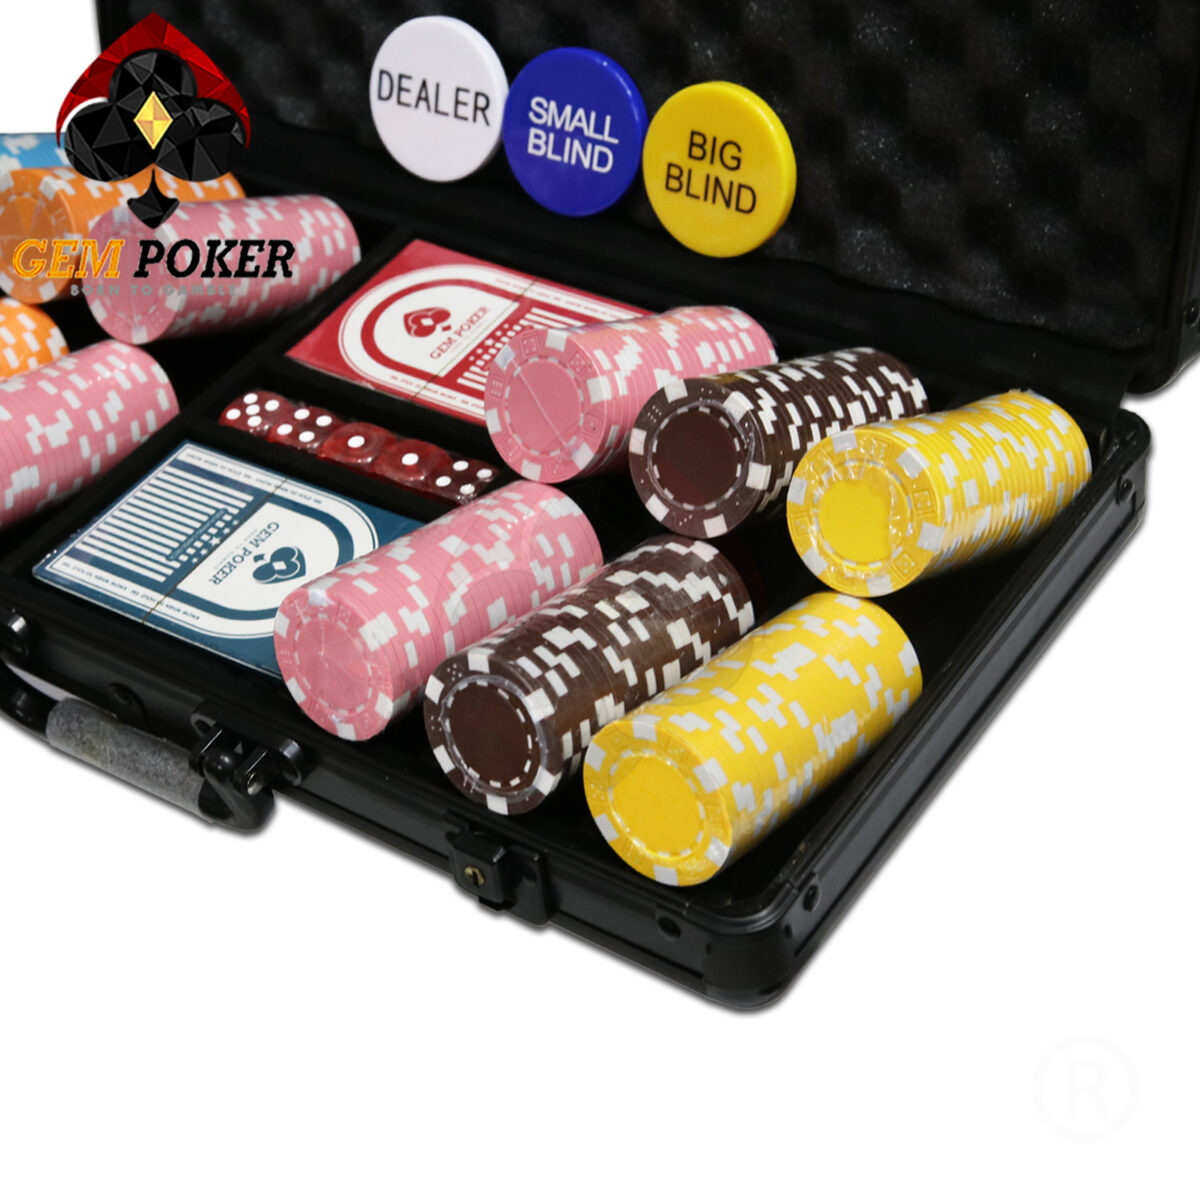 SET 300 ABS POKER CHIPS 5 COLORS